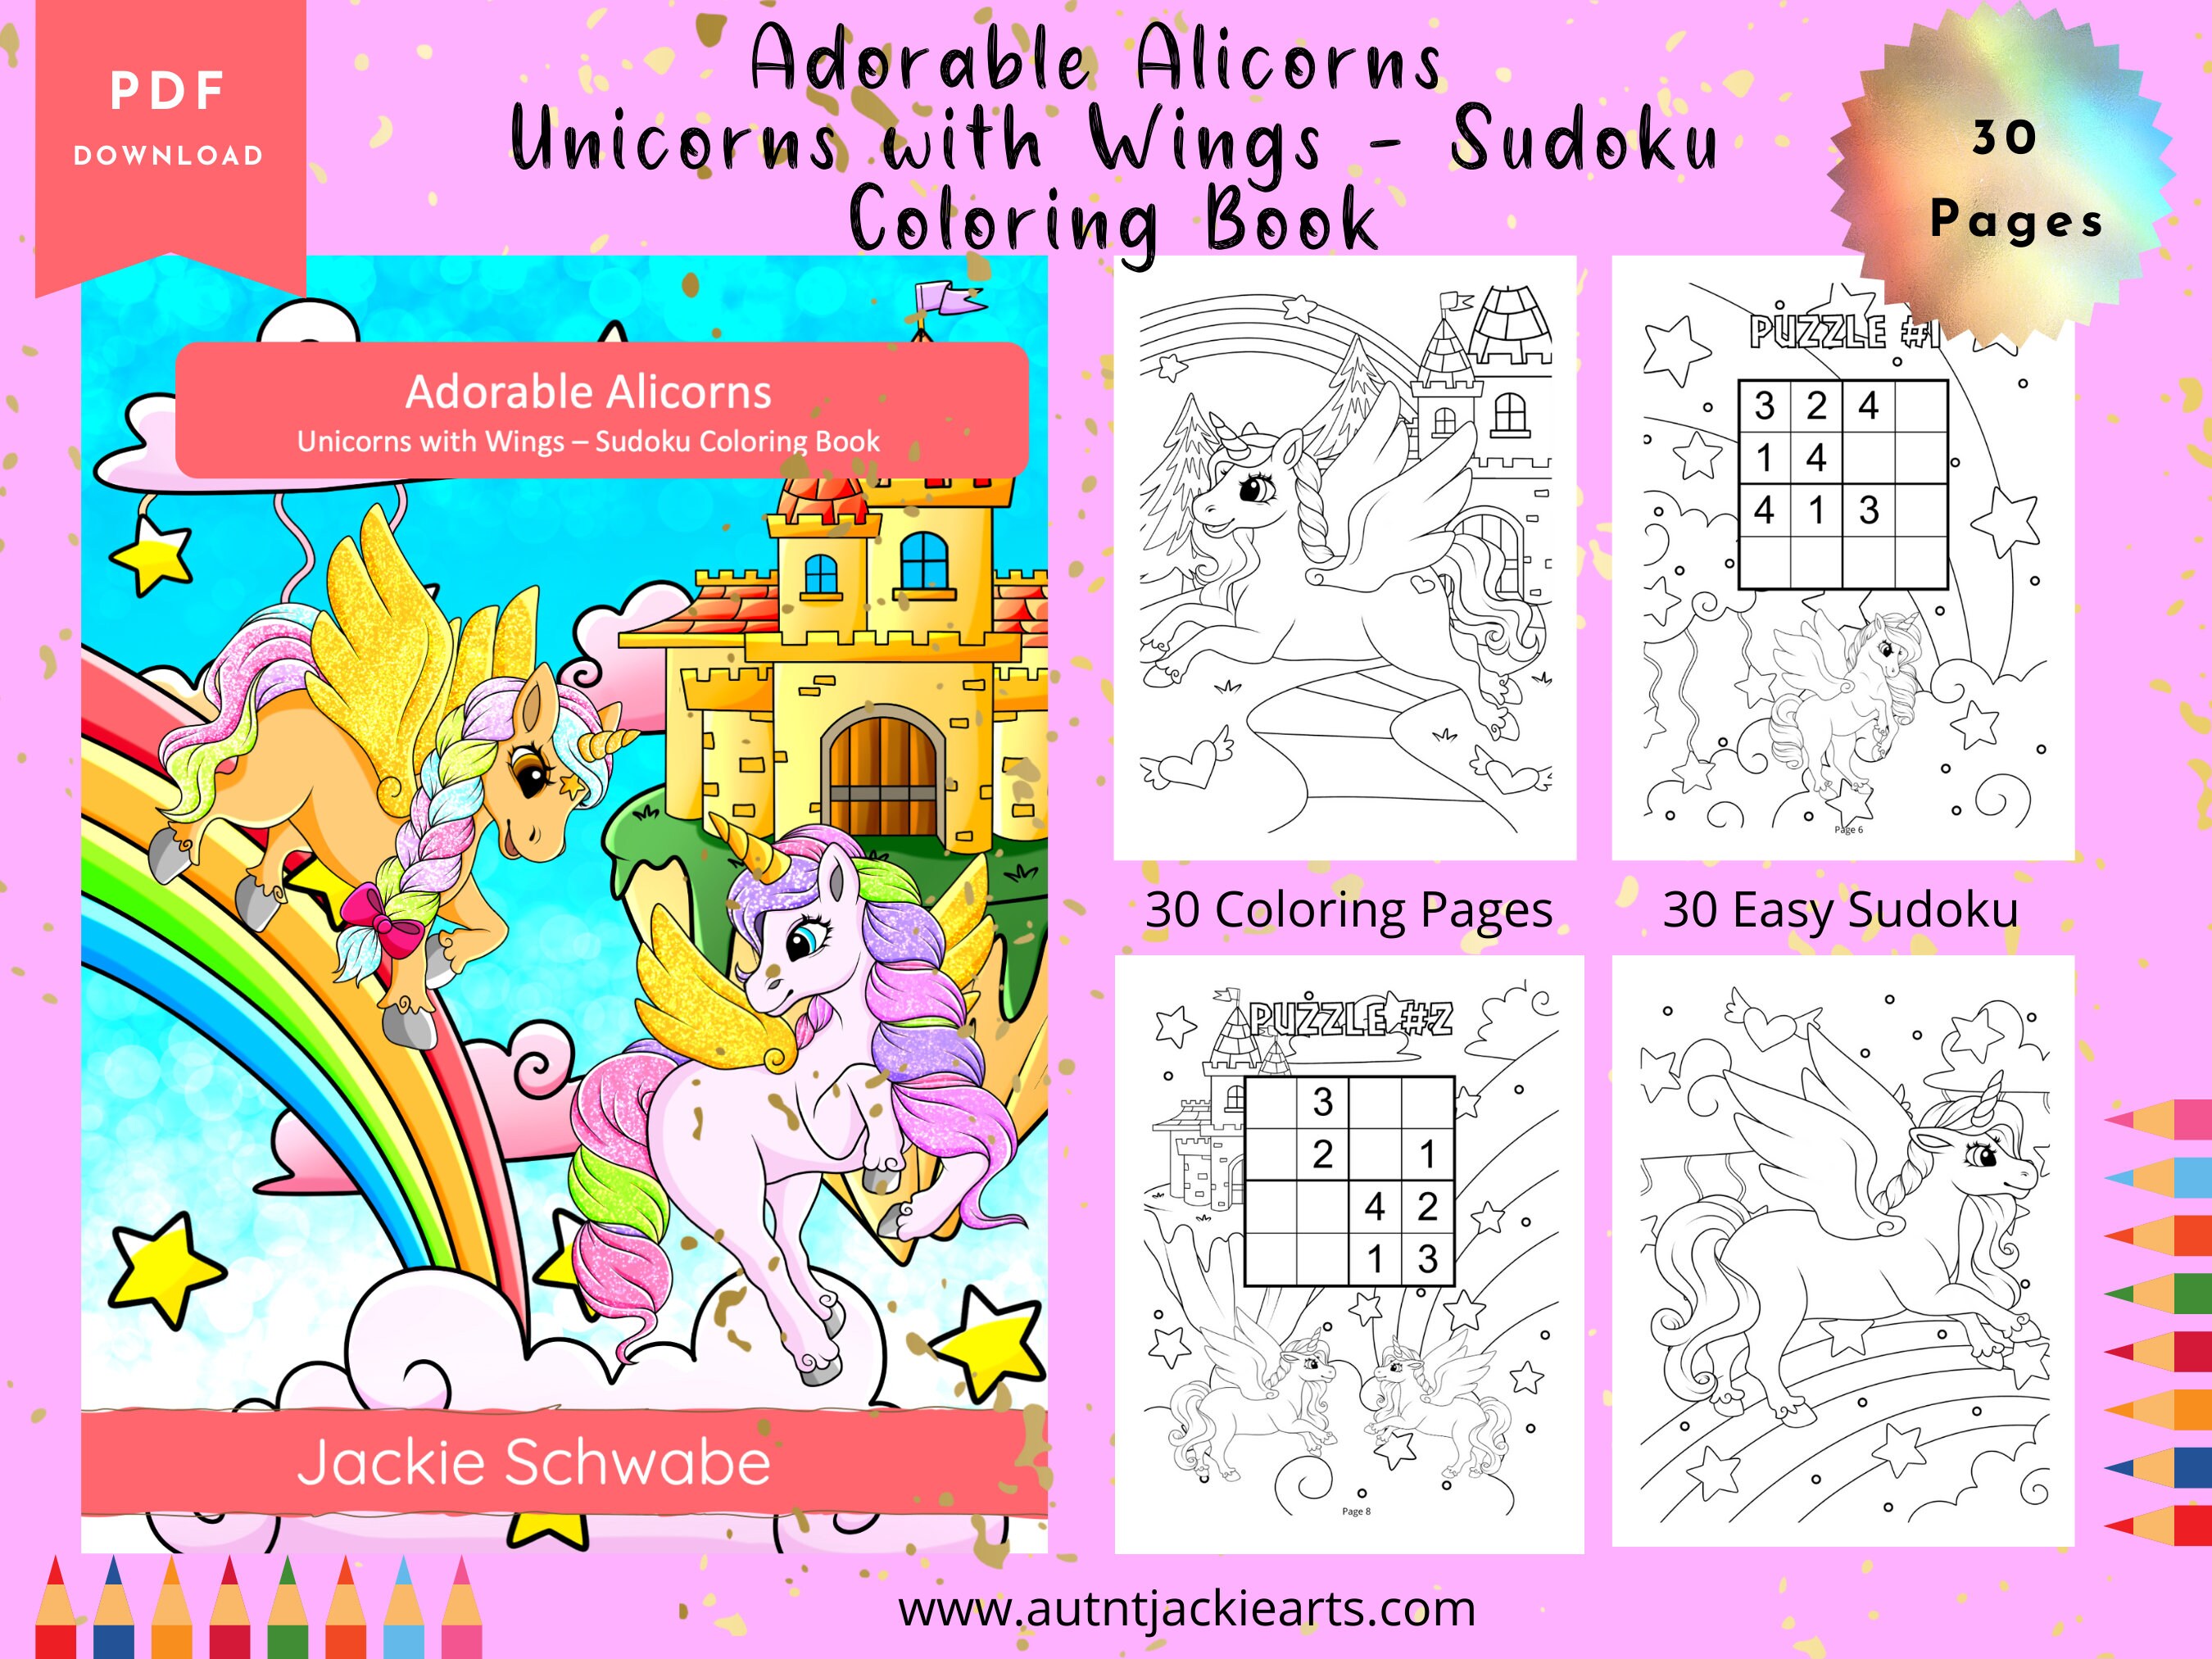 Lactation Adult Activities: Breastfeeding Games, Coloring, Hidden Image,  Math Games, Art Fun, Sudoku, Word Search, Word Games, Adult Puzzles 